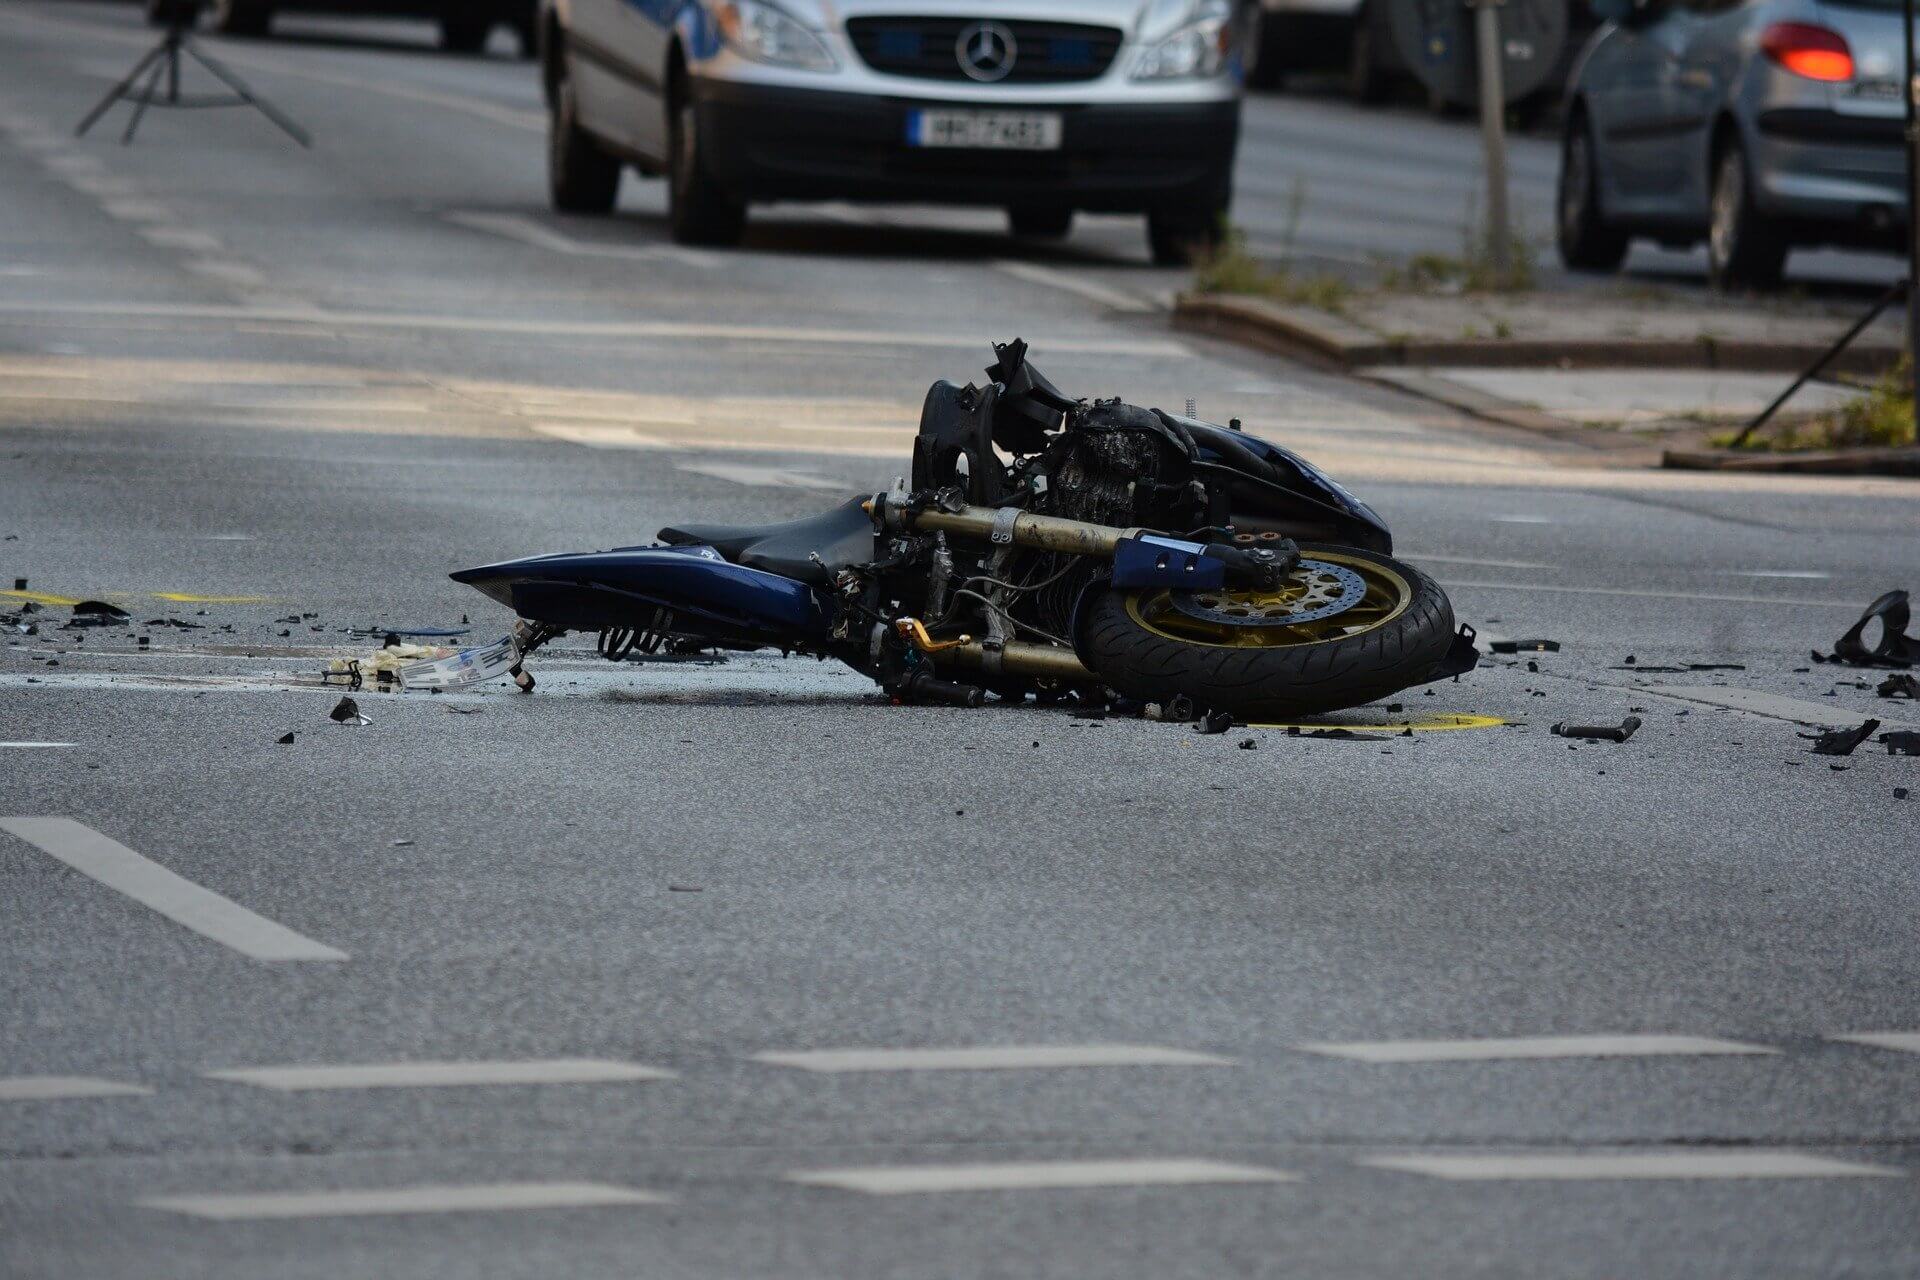 most common motorcycle accident injuries